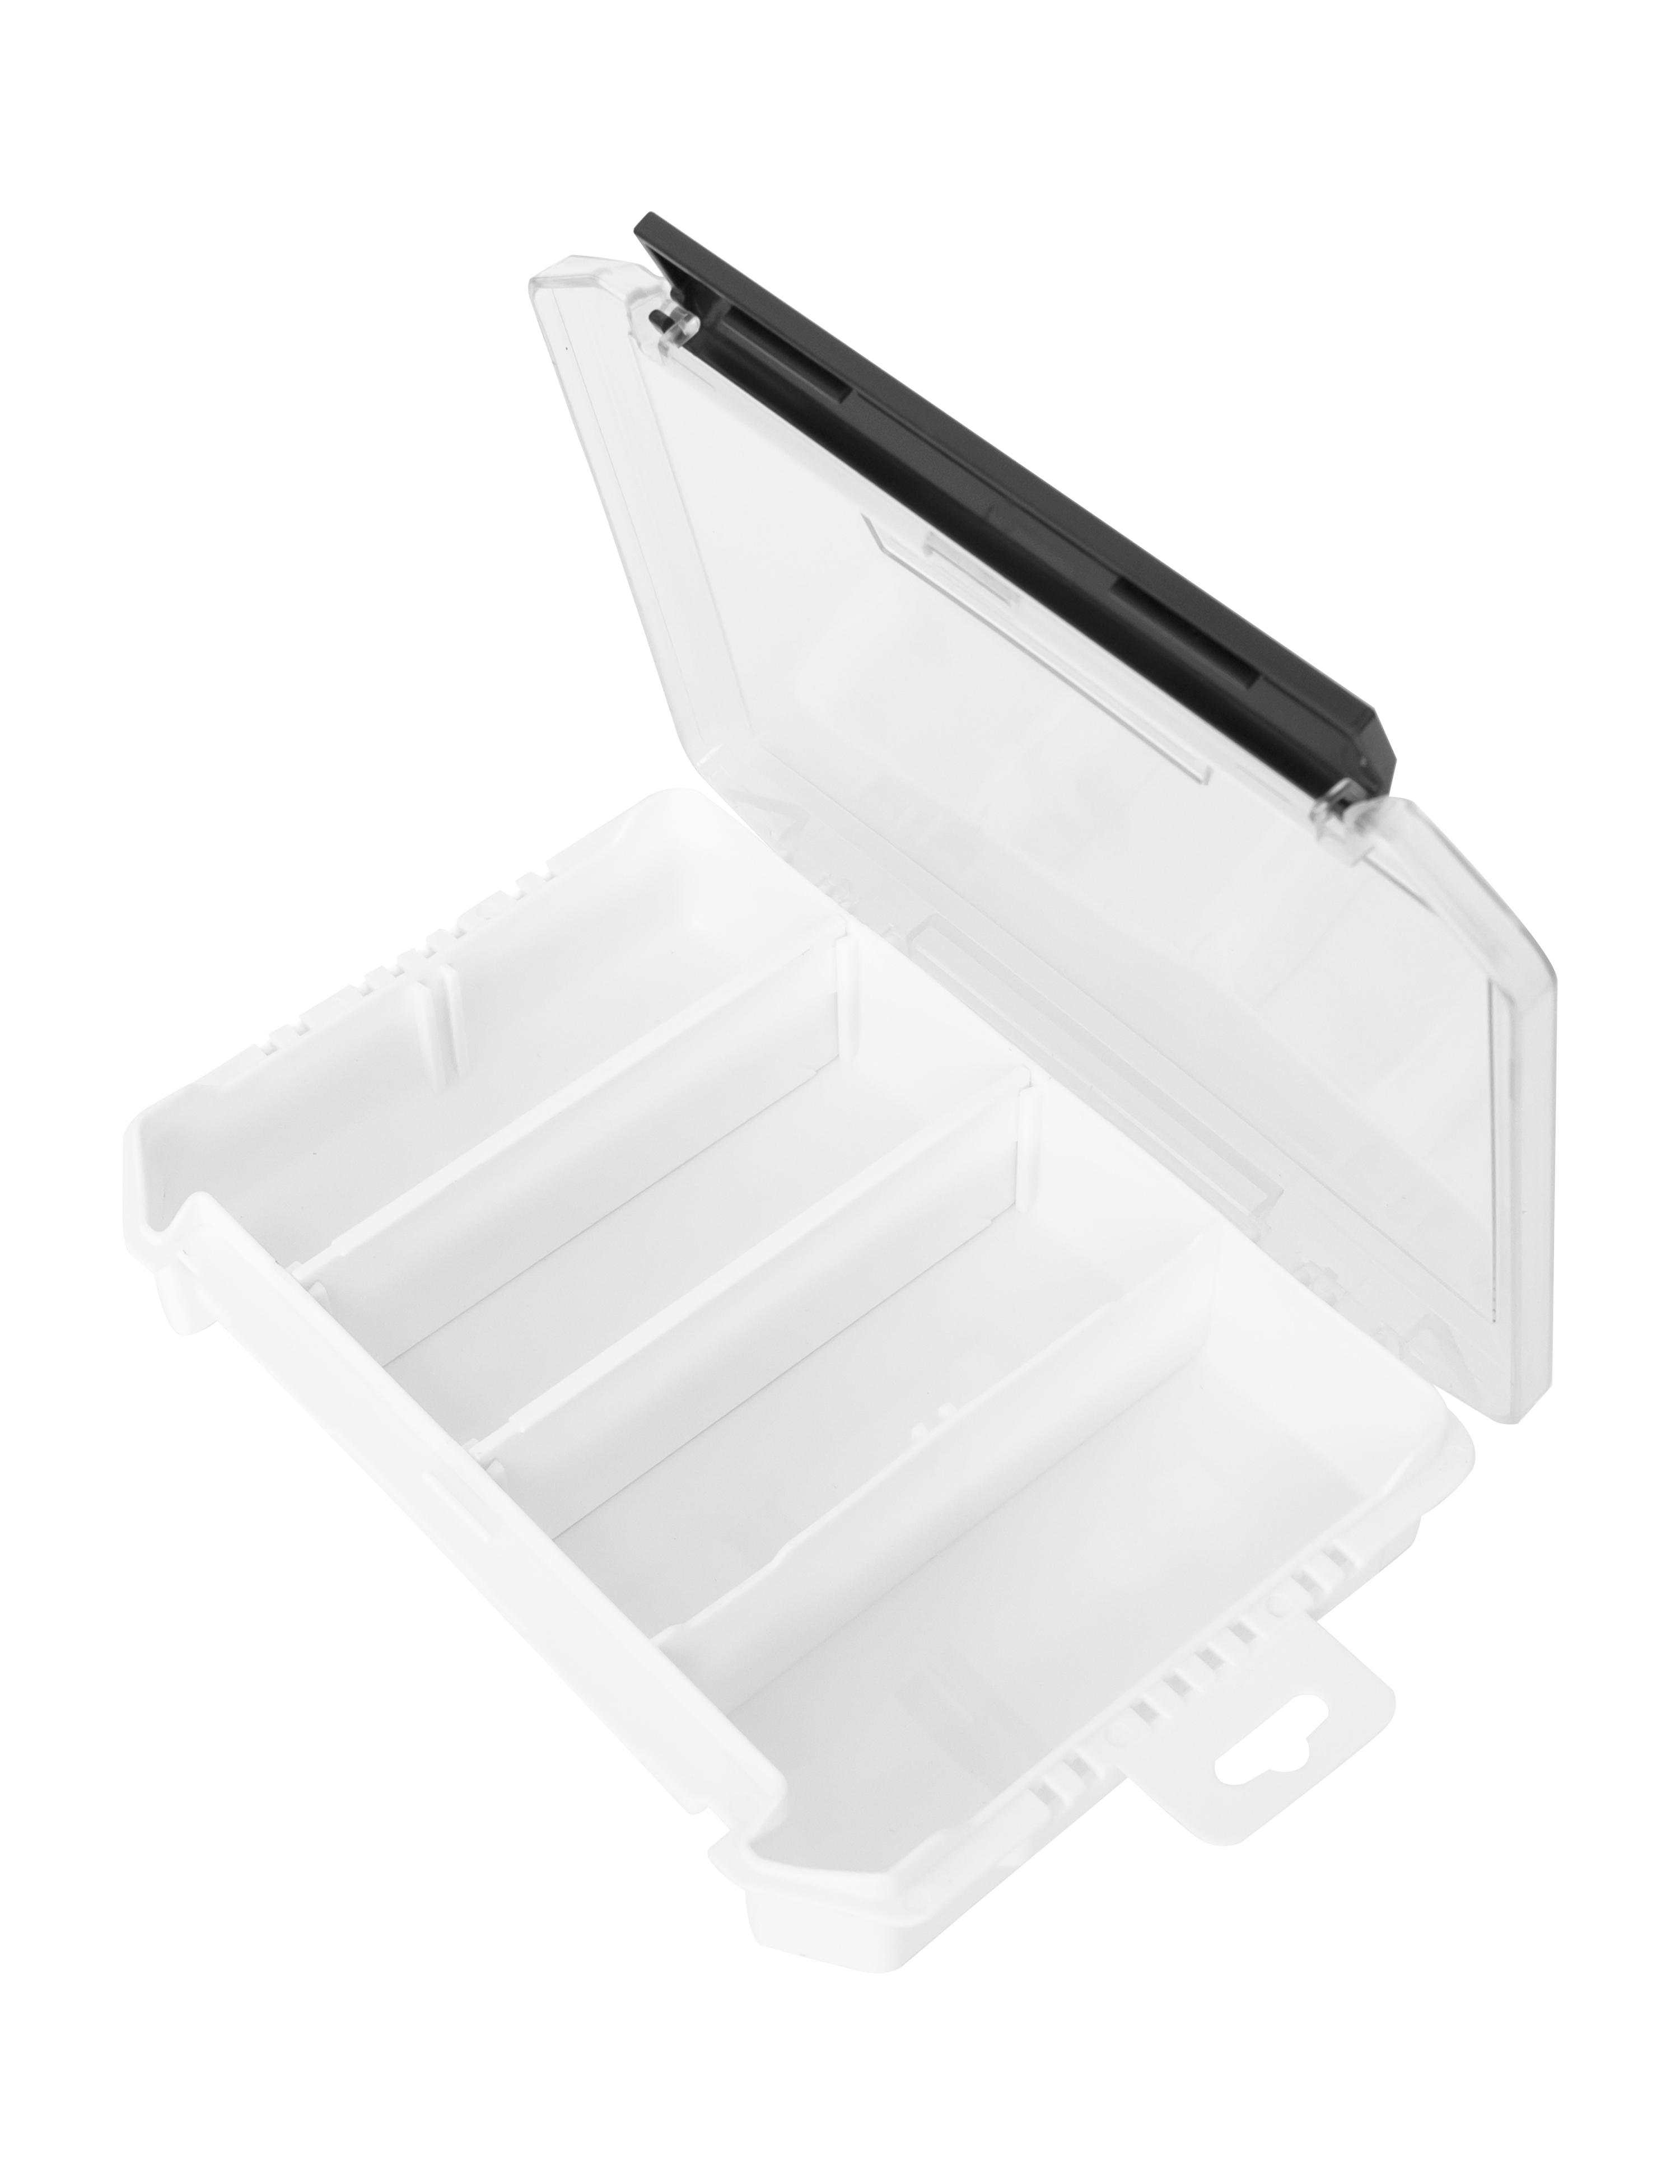 BLUEWING Tackle Storage Tray Durable Waterproof Adjustable Compartments